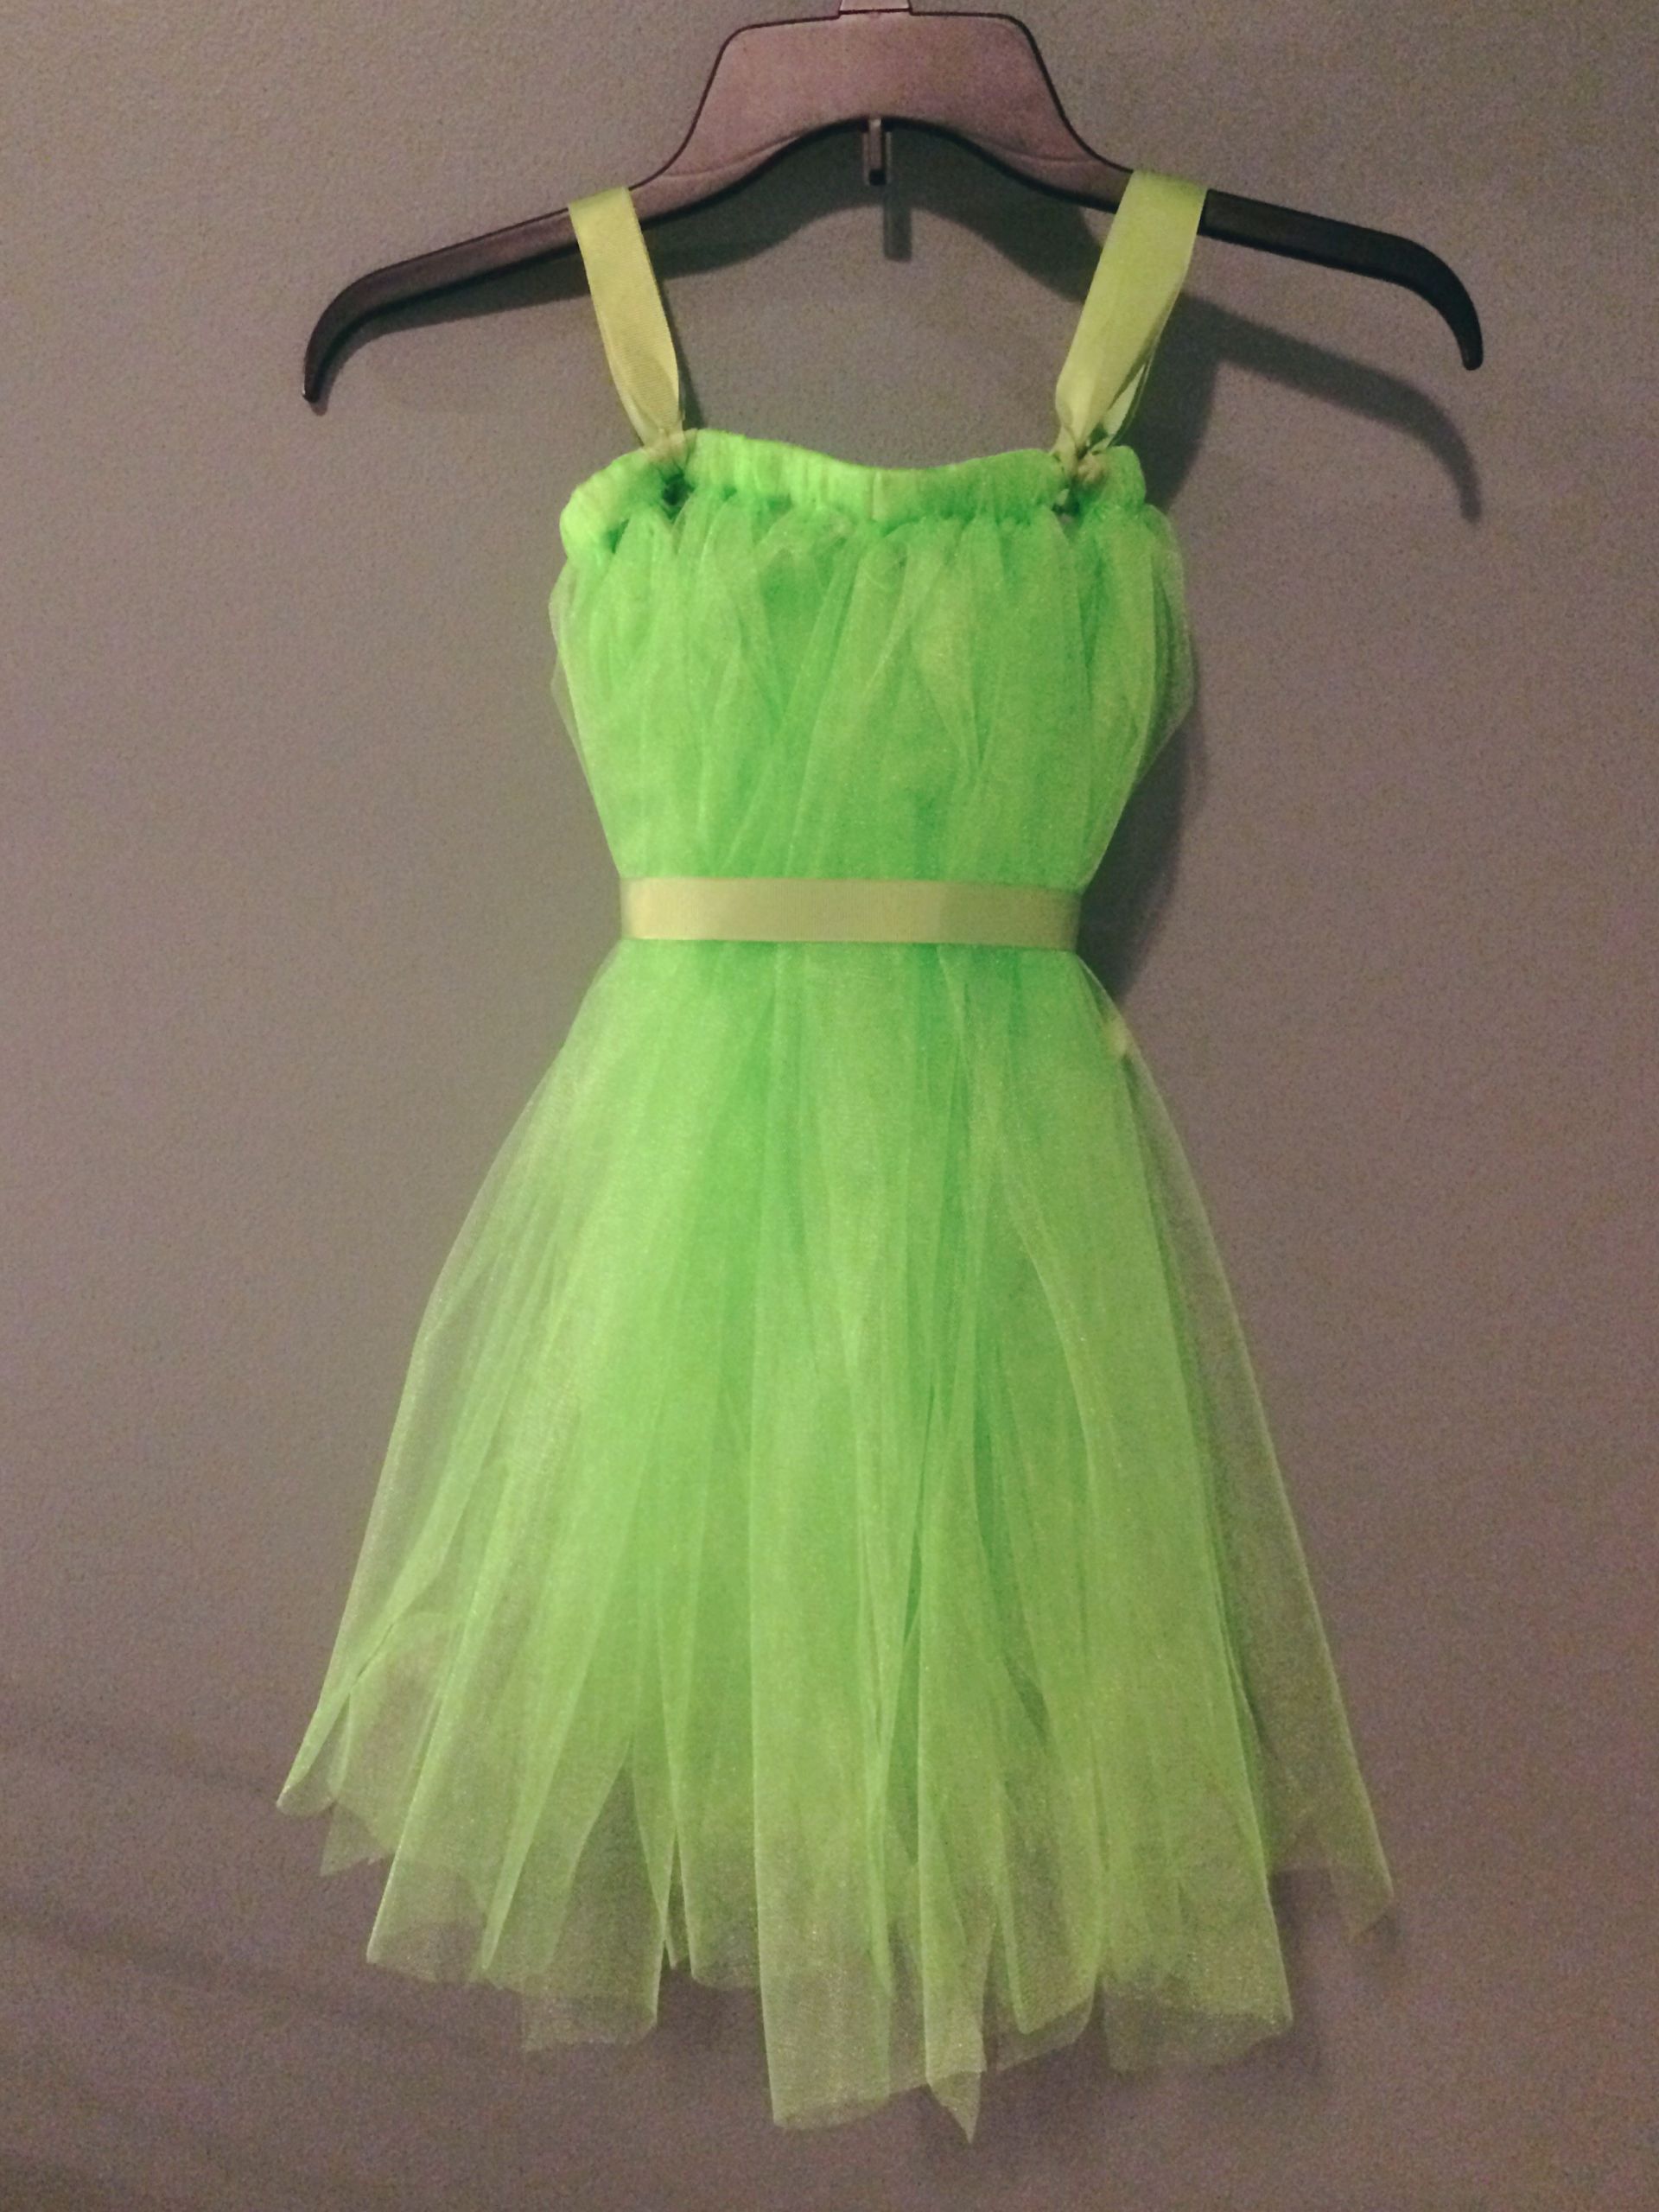 Tinkerbell Costume DIY
 Kylee s Creations – Creating as much as possible in this